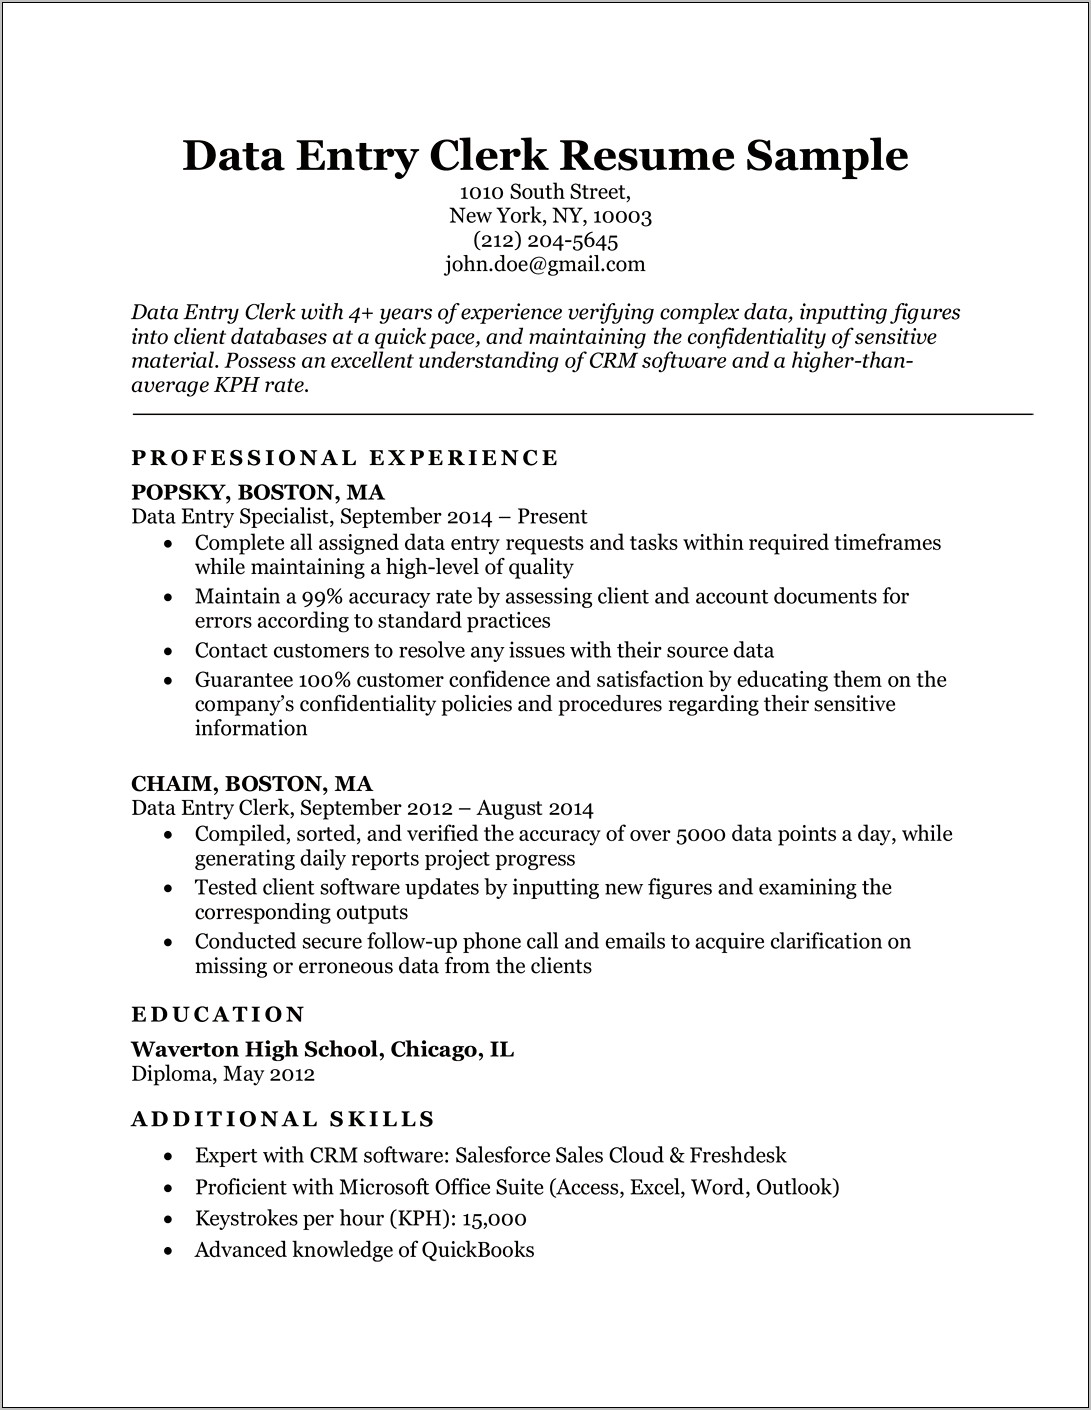 Resume Objective Examples Data Entry